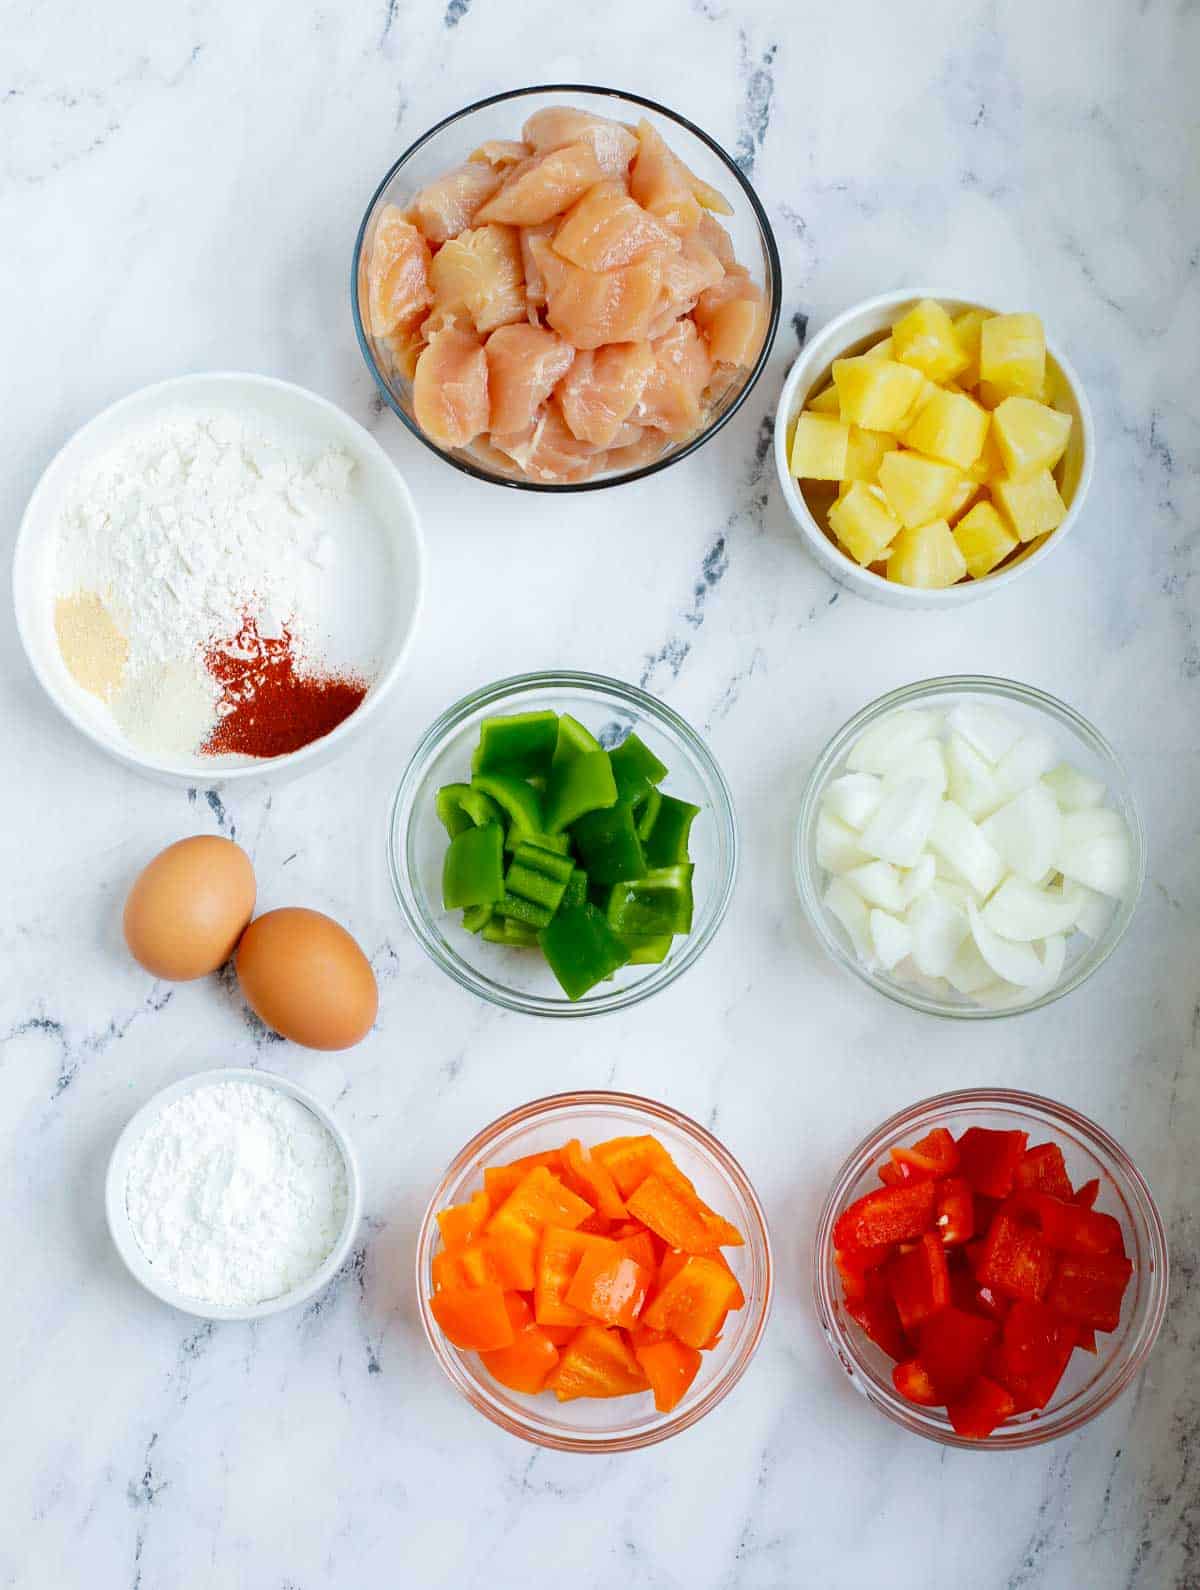 Ingredients needed for Homemade sweet and sour chicken